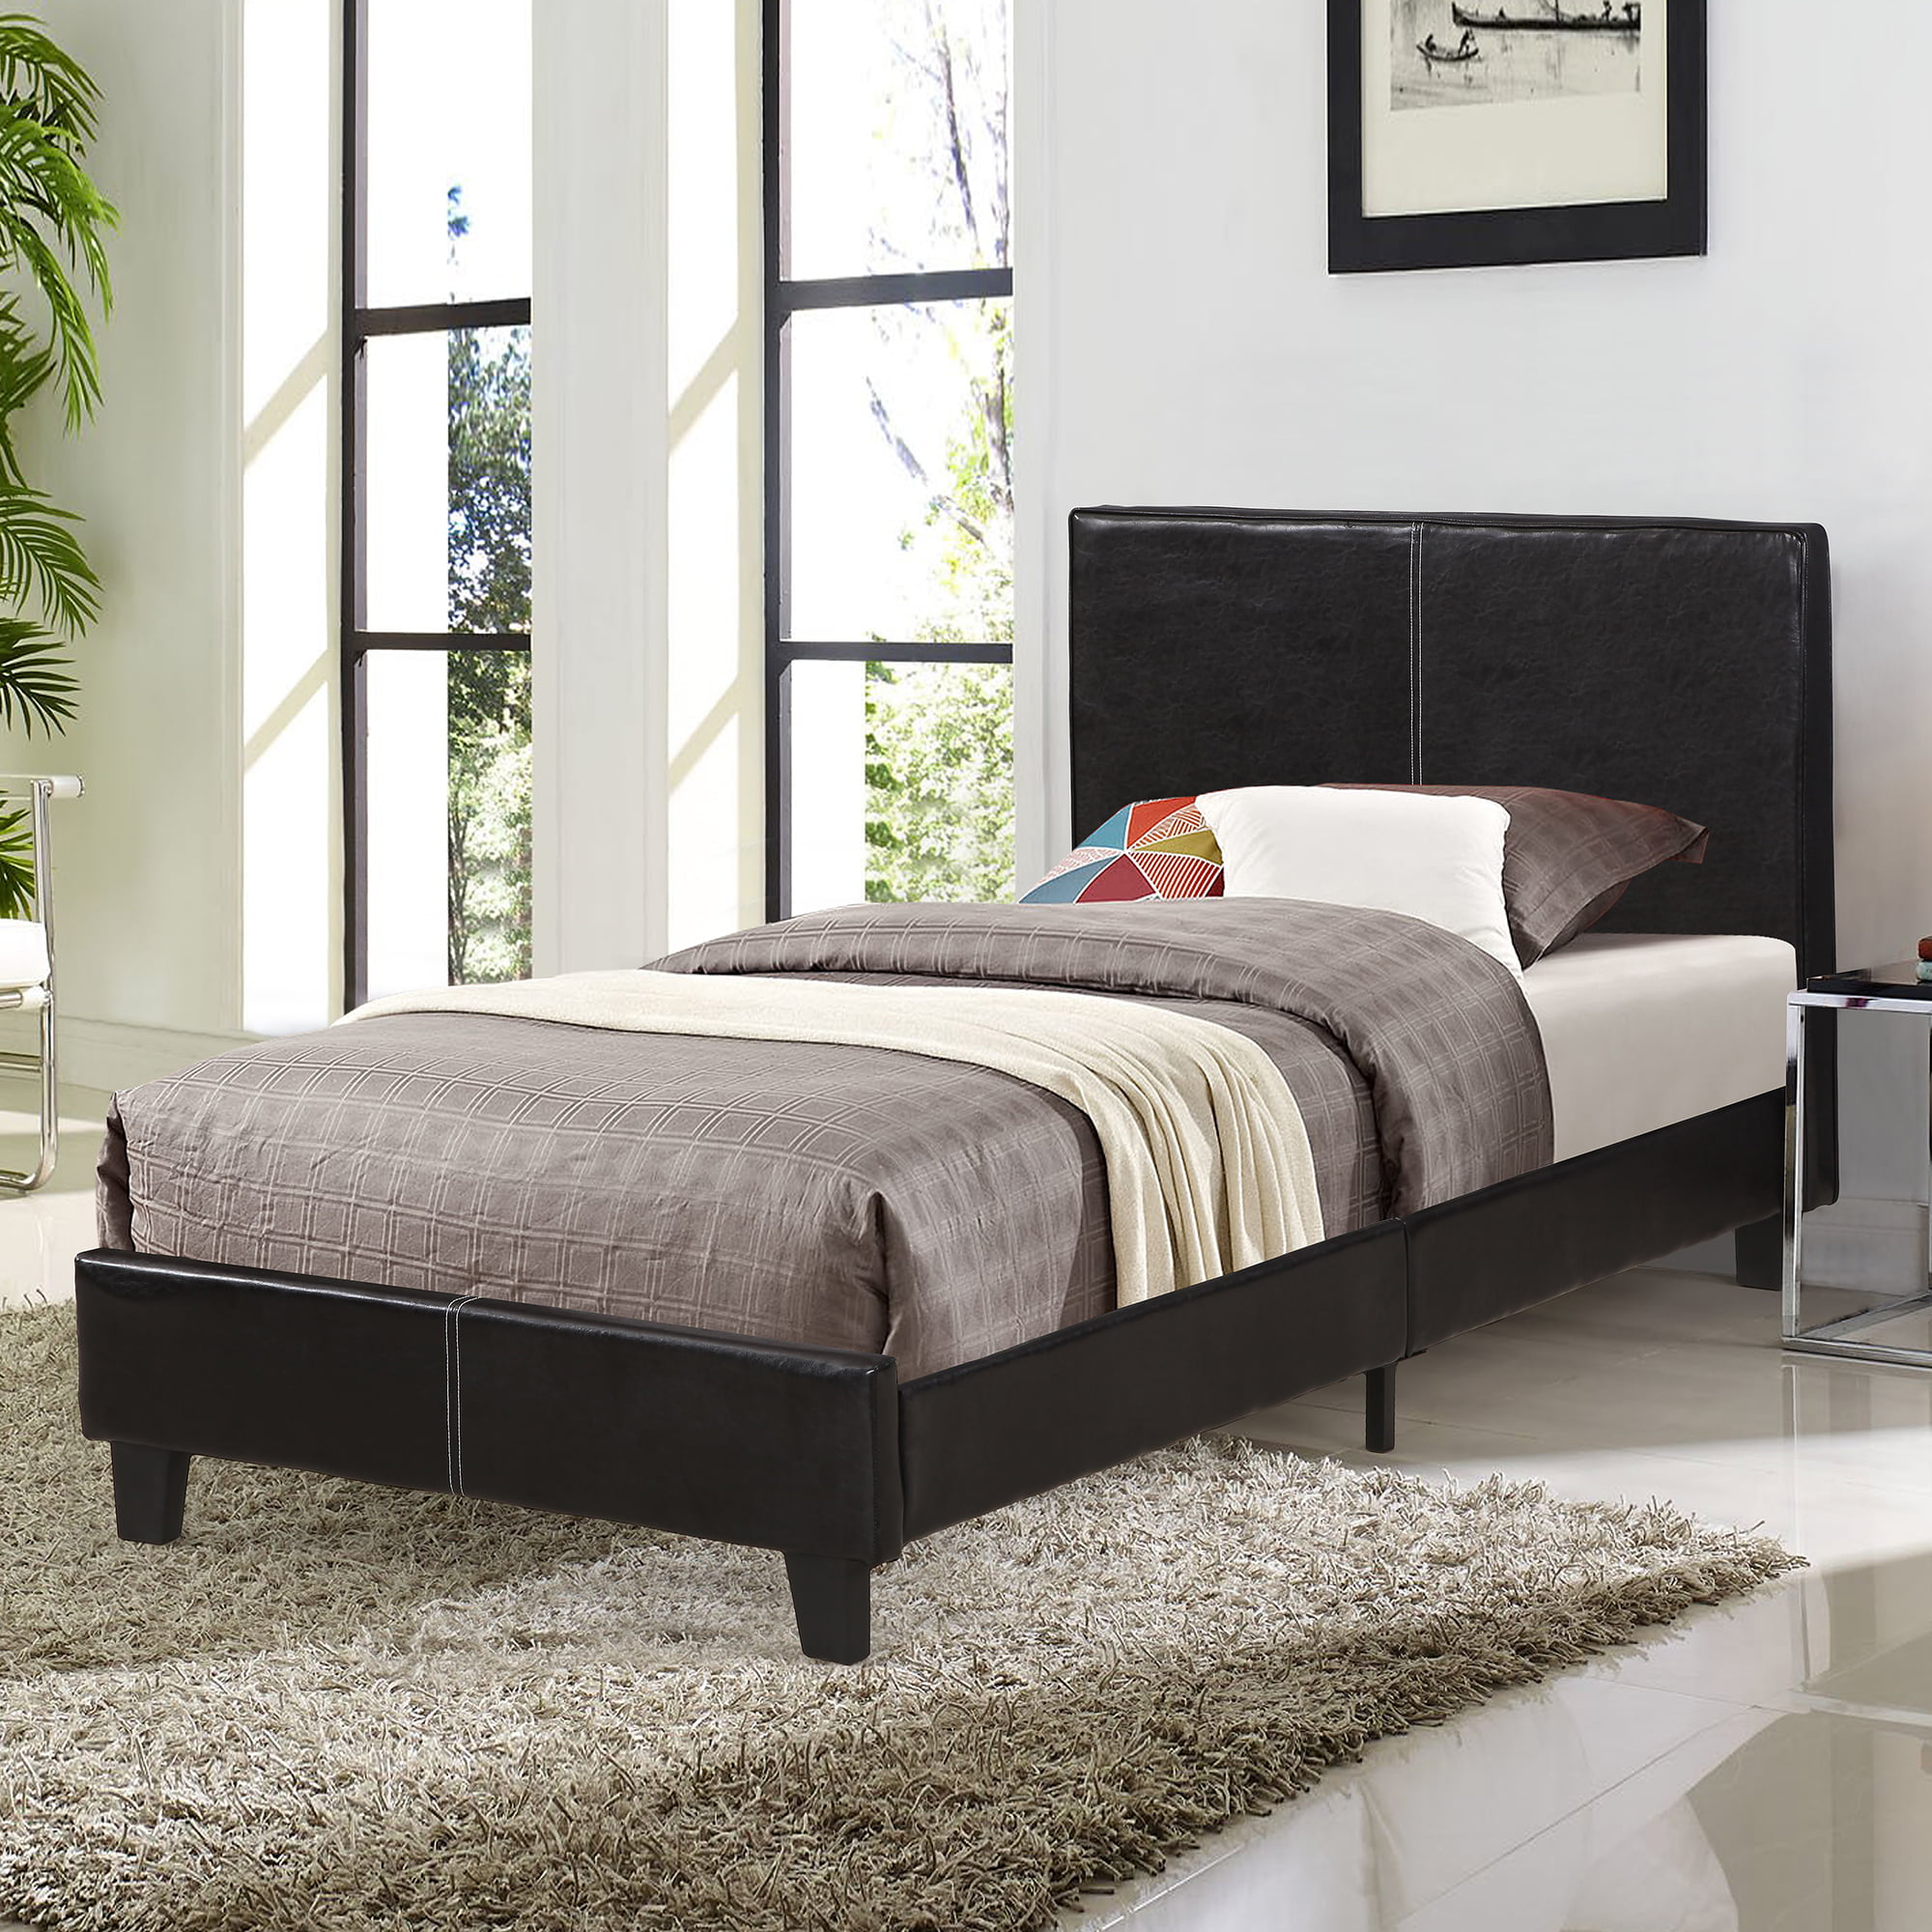 Twin Platform Bed Frame with Headboard, Heavy Duty Faux Leather 